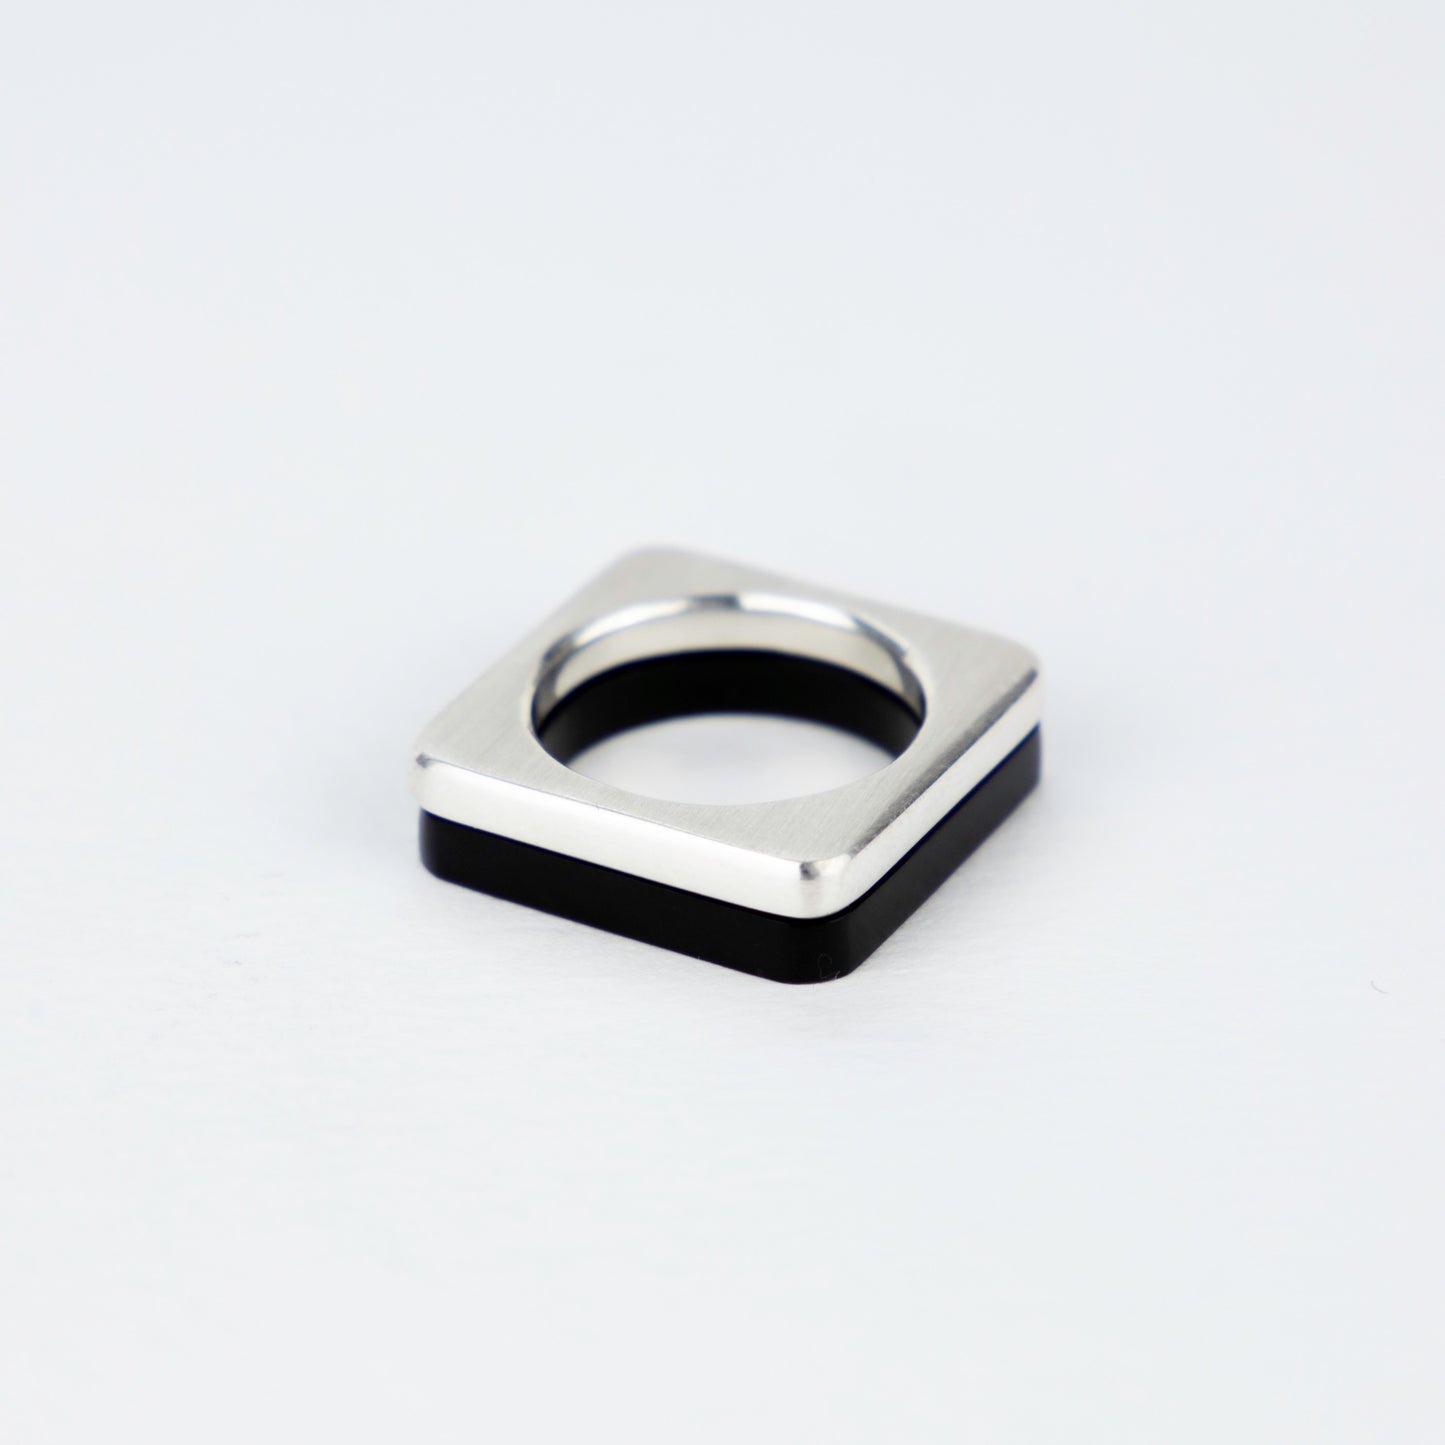 Square black perspex ring with heavy silver ring www.barbaraspence.co.uk